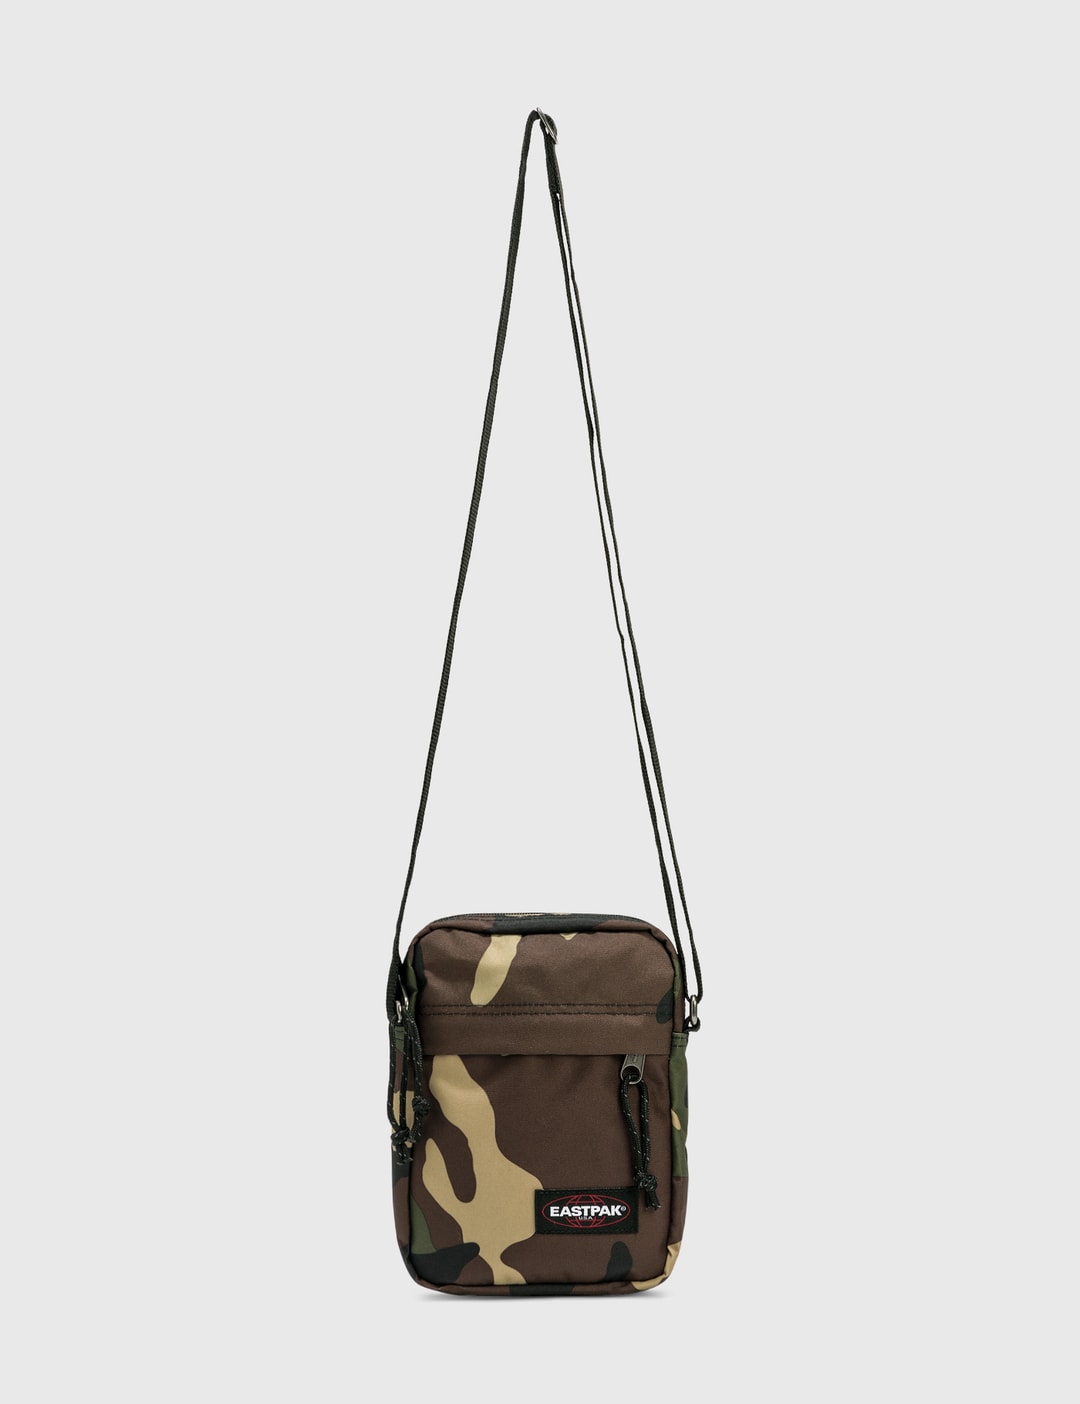 Eastpak - The One Crossbody | HBX - Globally Curated Fashion and ...